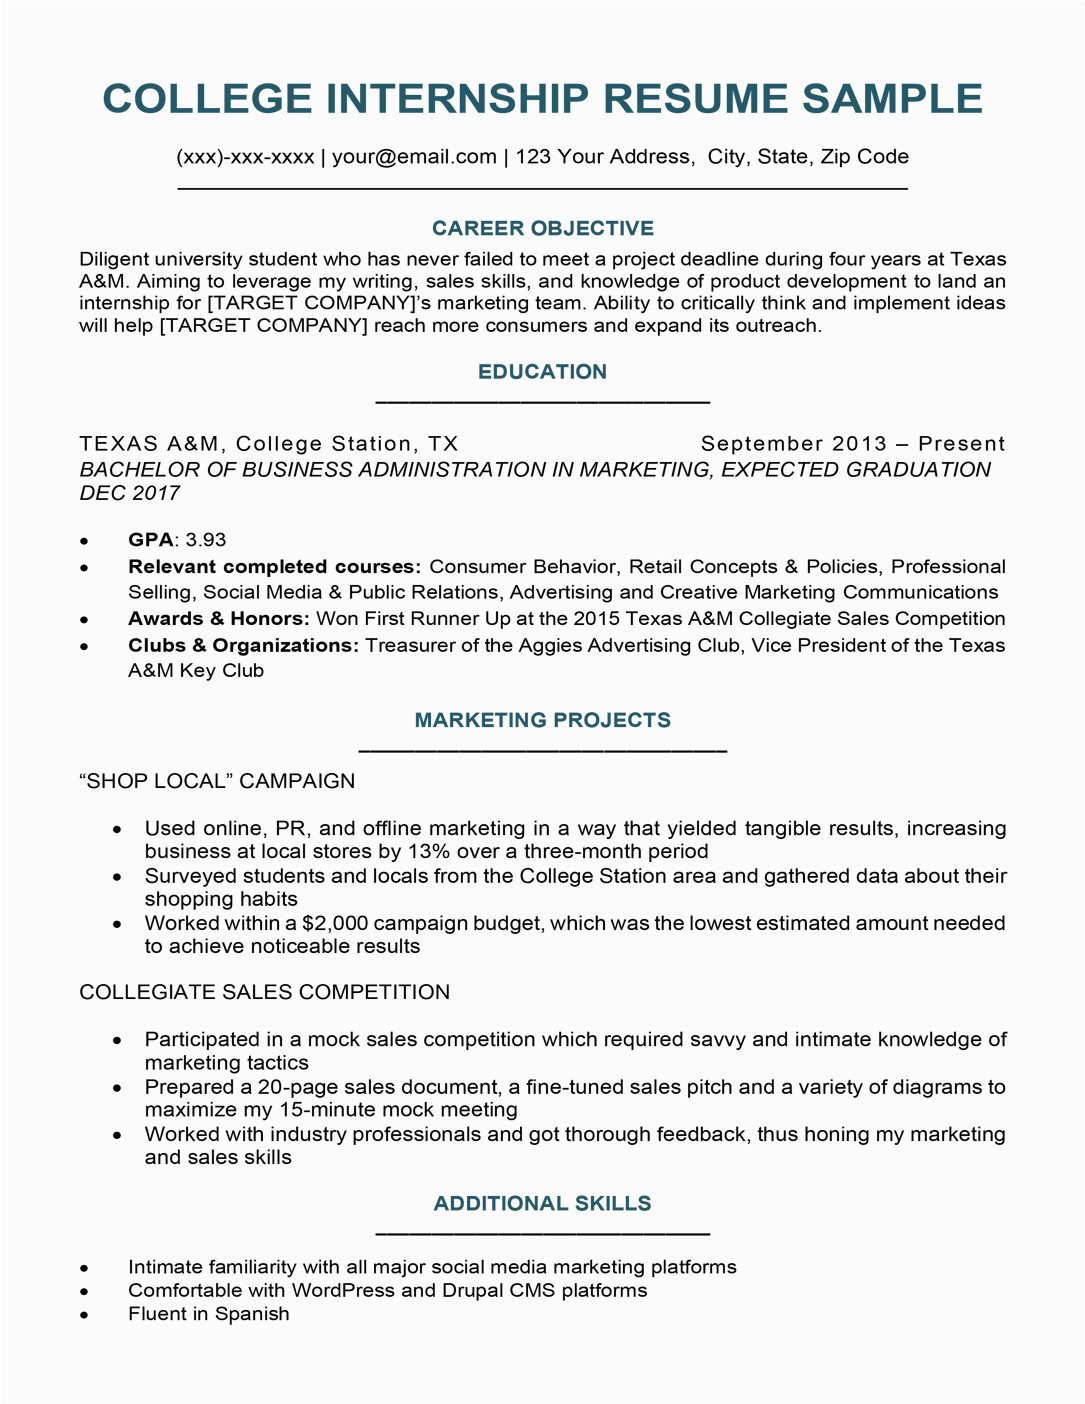 Student Resume for College Applications Sample College Student Resume Sample & Writing Tips